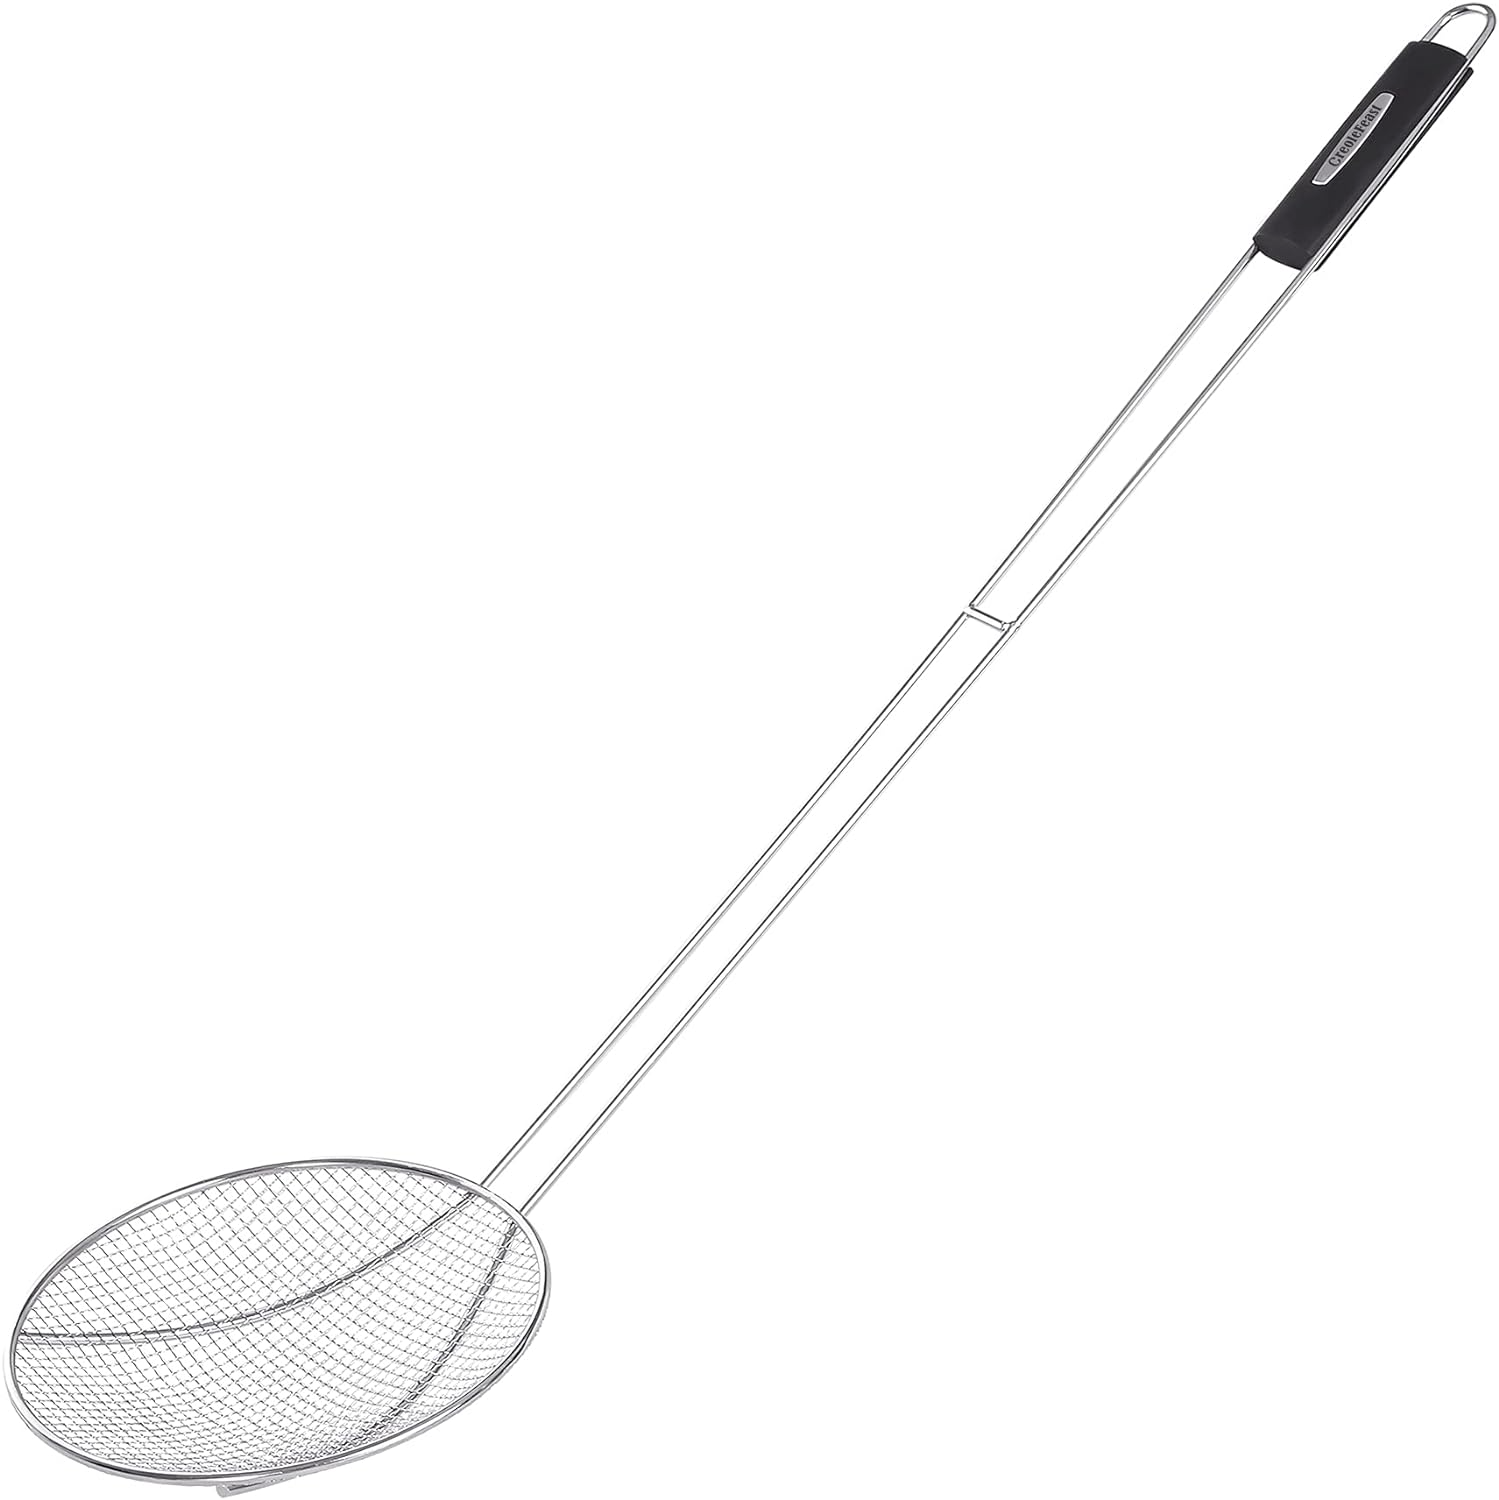 Creole Feast SKM3602 36-Inch Stainless Steel Skimmer with 8" Bowl, Wire Strainer and Mesh Scoop, Crawfish Long Ladle Accessories for Large Batch Outdoor Cooking - Barbecue Whizz...Watch My Smoke!